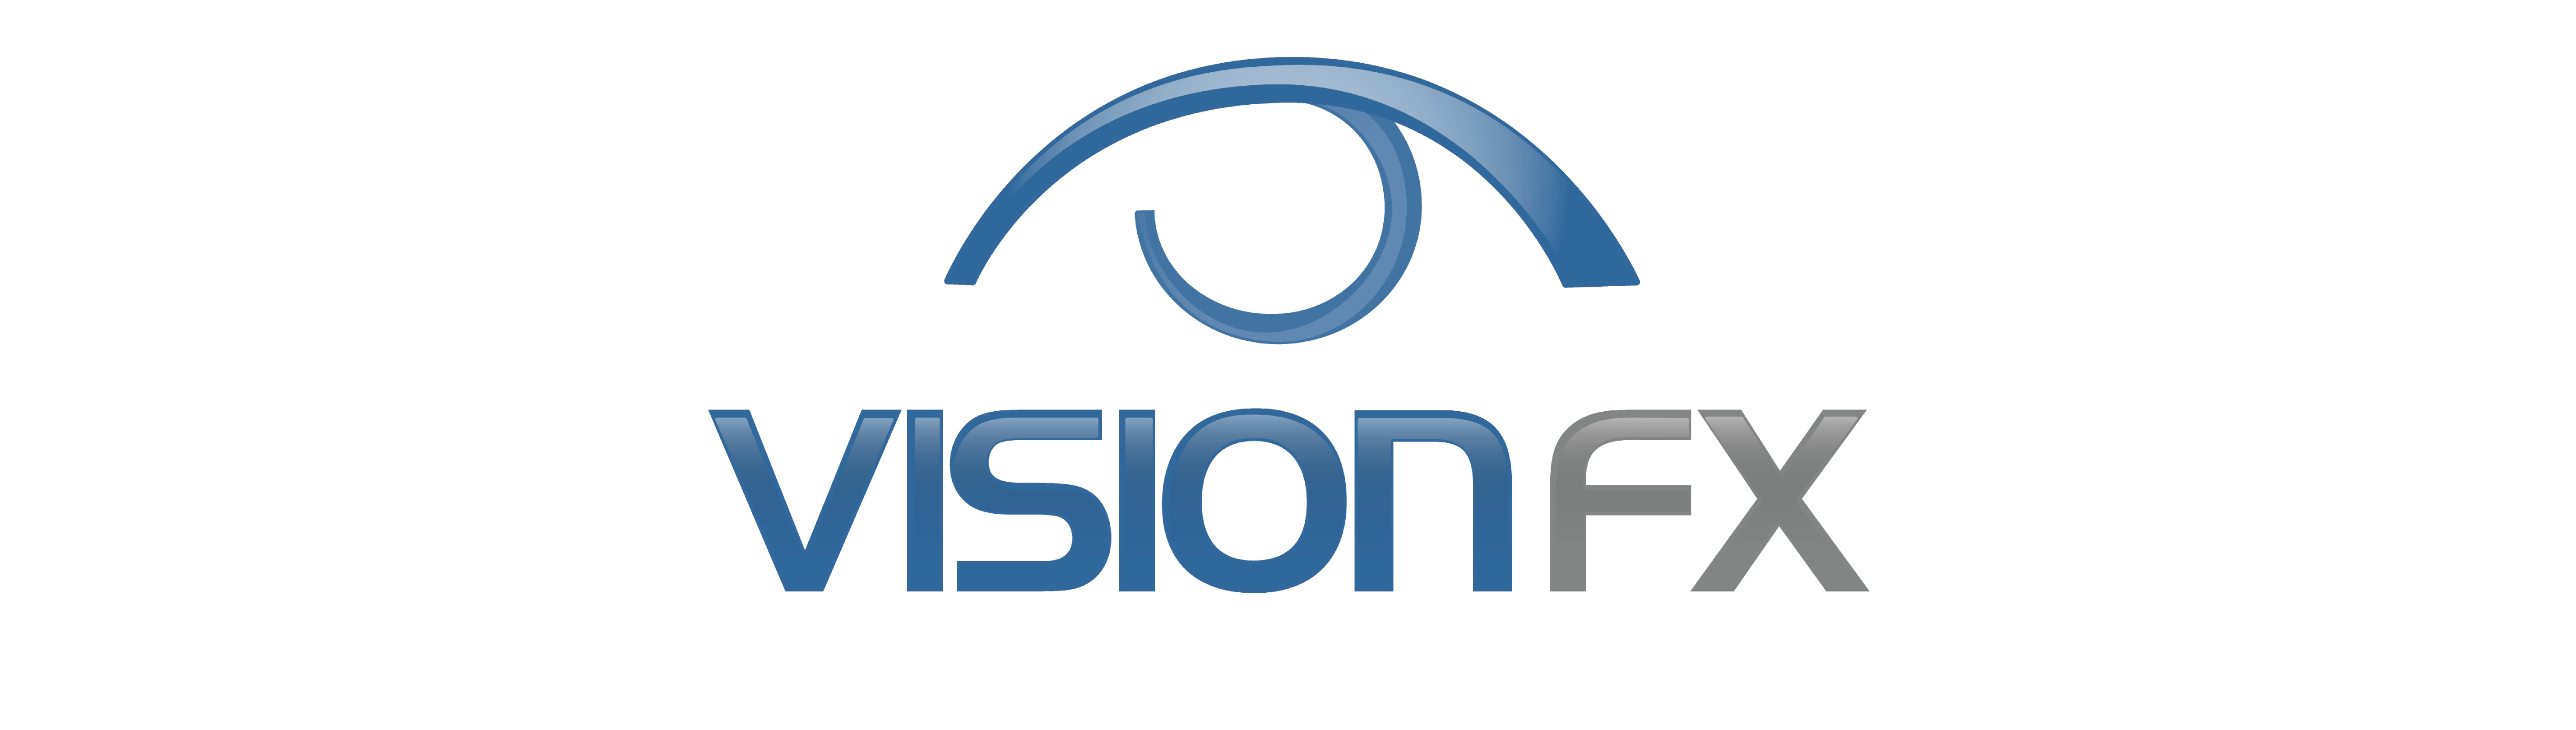 Vision FX Optometry | Eye doctors Discovery Bay, Brentwood, Mountain House, Byron CA